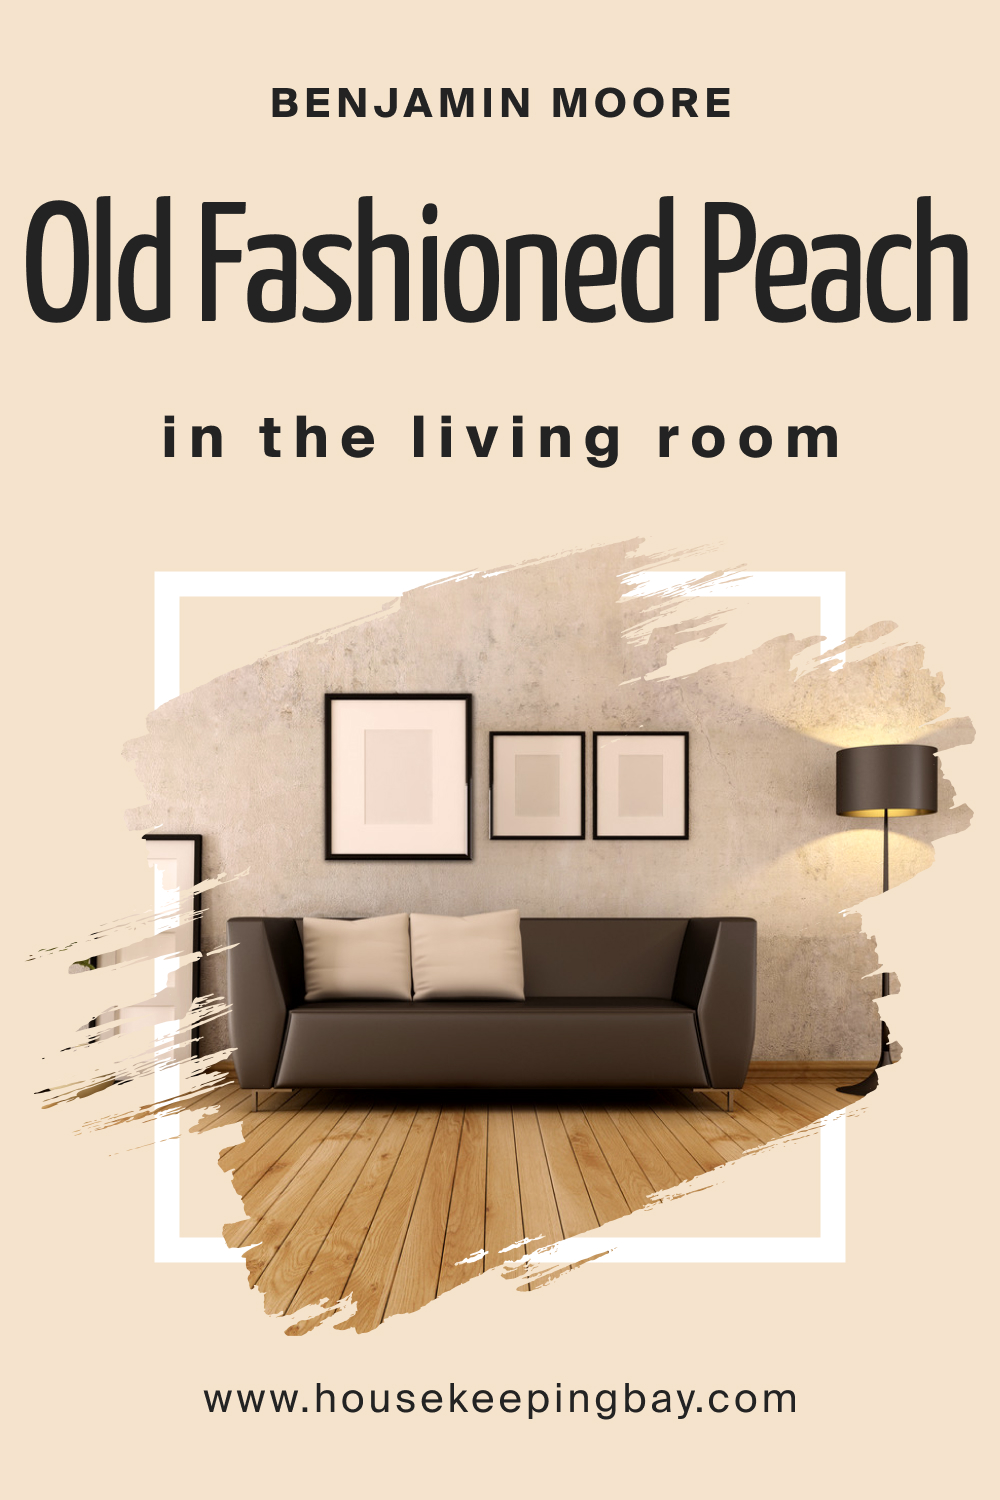 Benjamin Moore. Old Fashioned Peach OC 79 in the Living Room